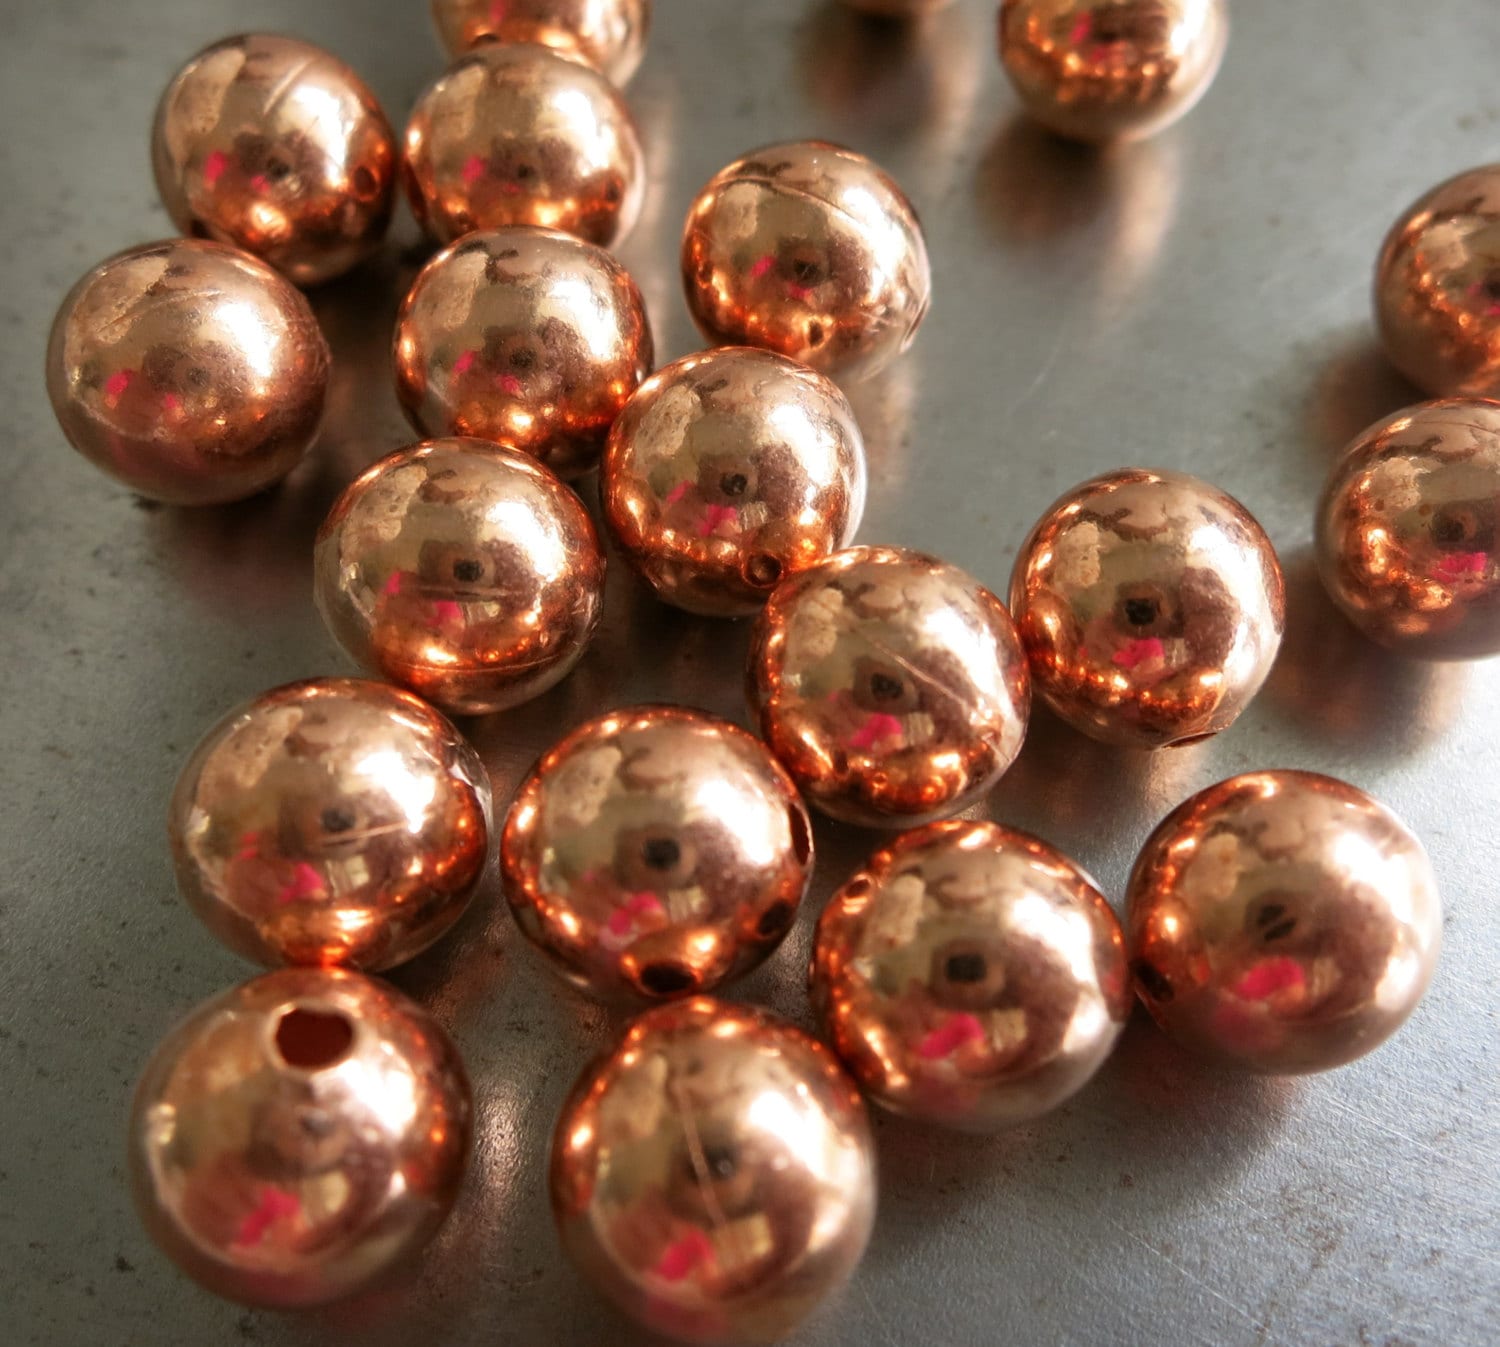 5.5mm Gold Shiny Ball Beads, 100pcs Gold Plated Round Ball Spacer Beads for  Jewelry Making 